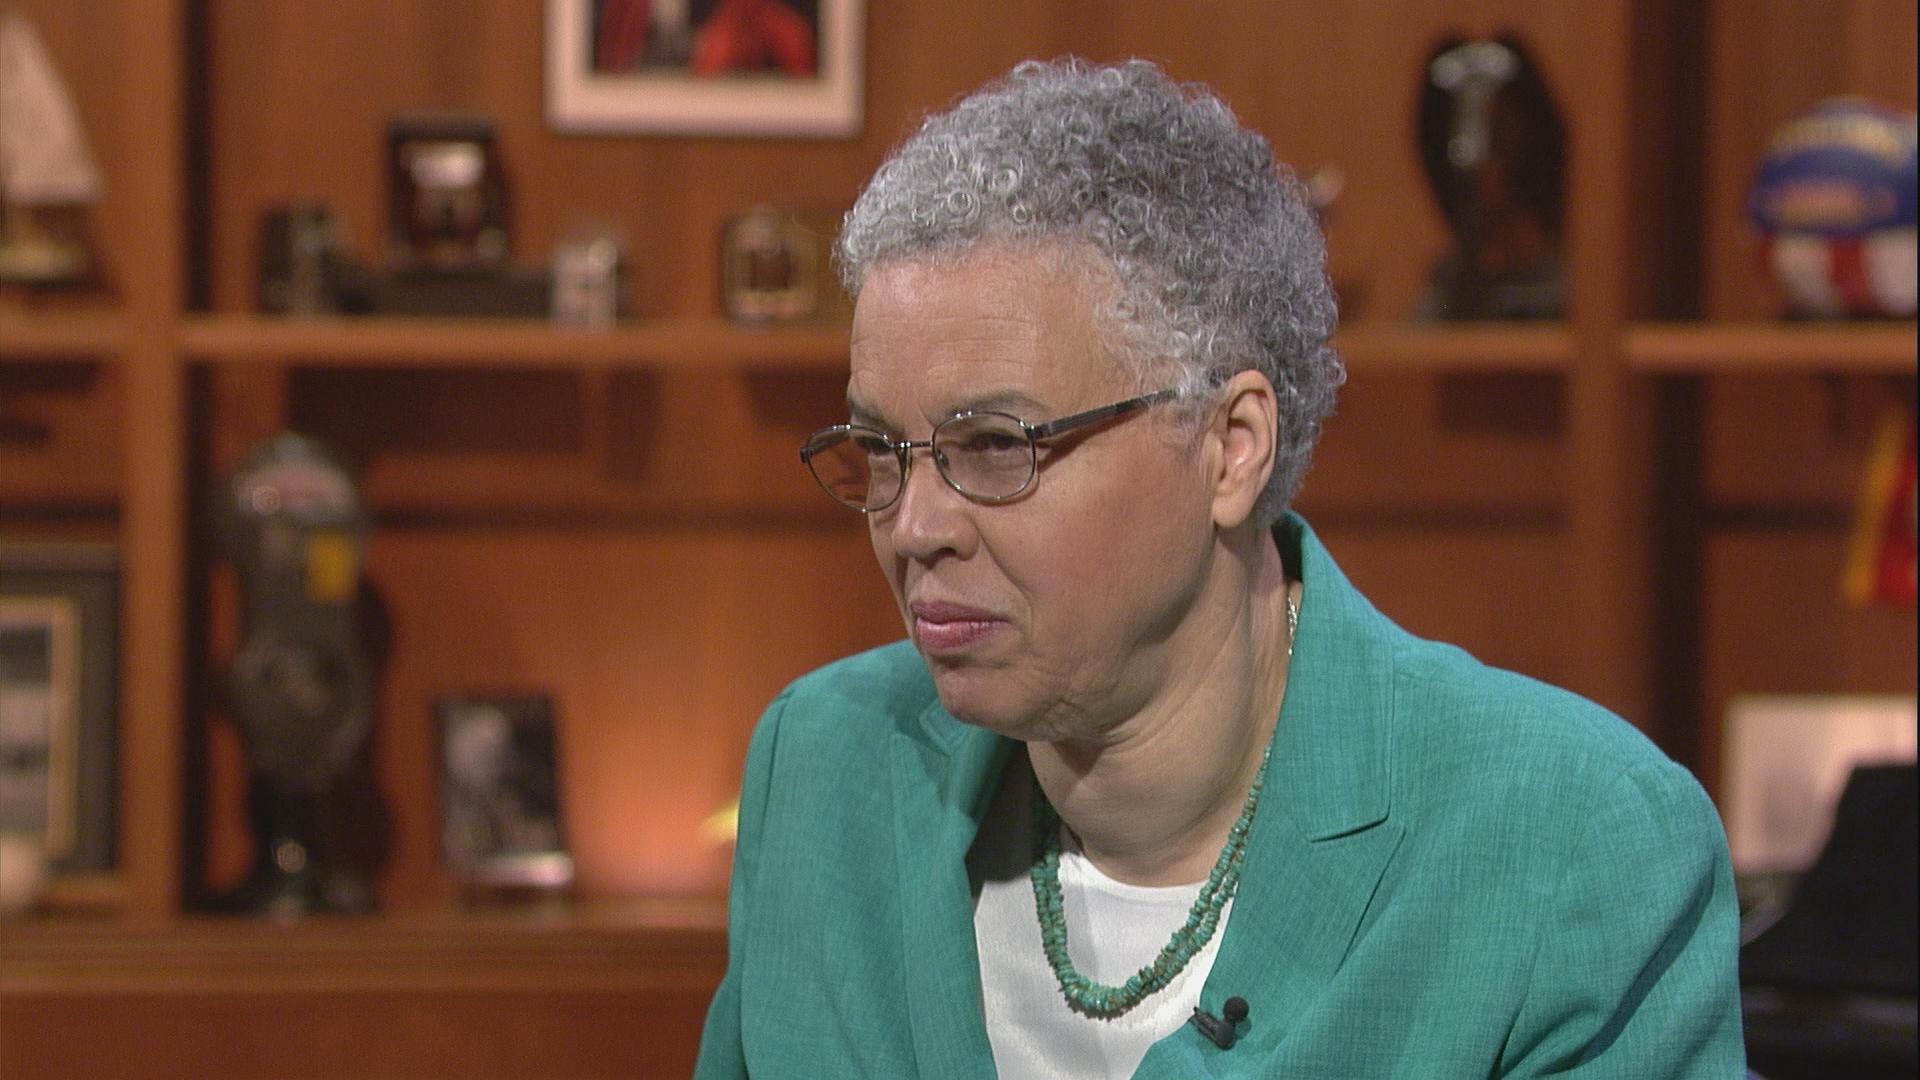 Toni Preckwinkle appears on “Chicago Tonight” on June 22, 2017.